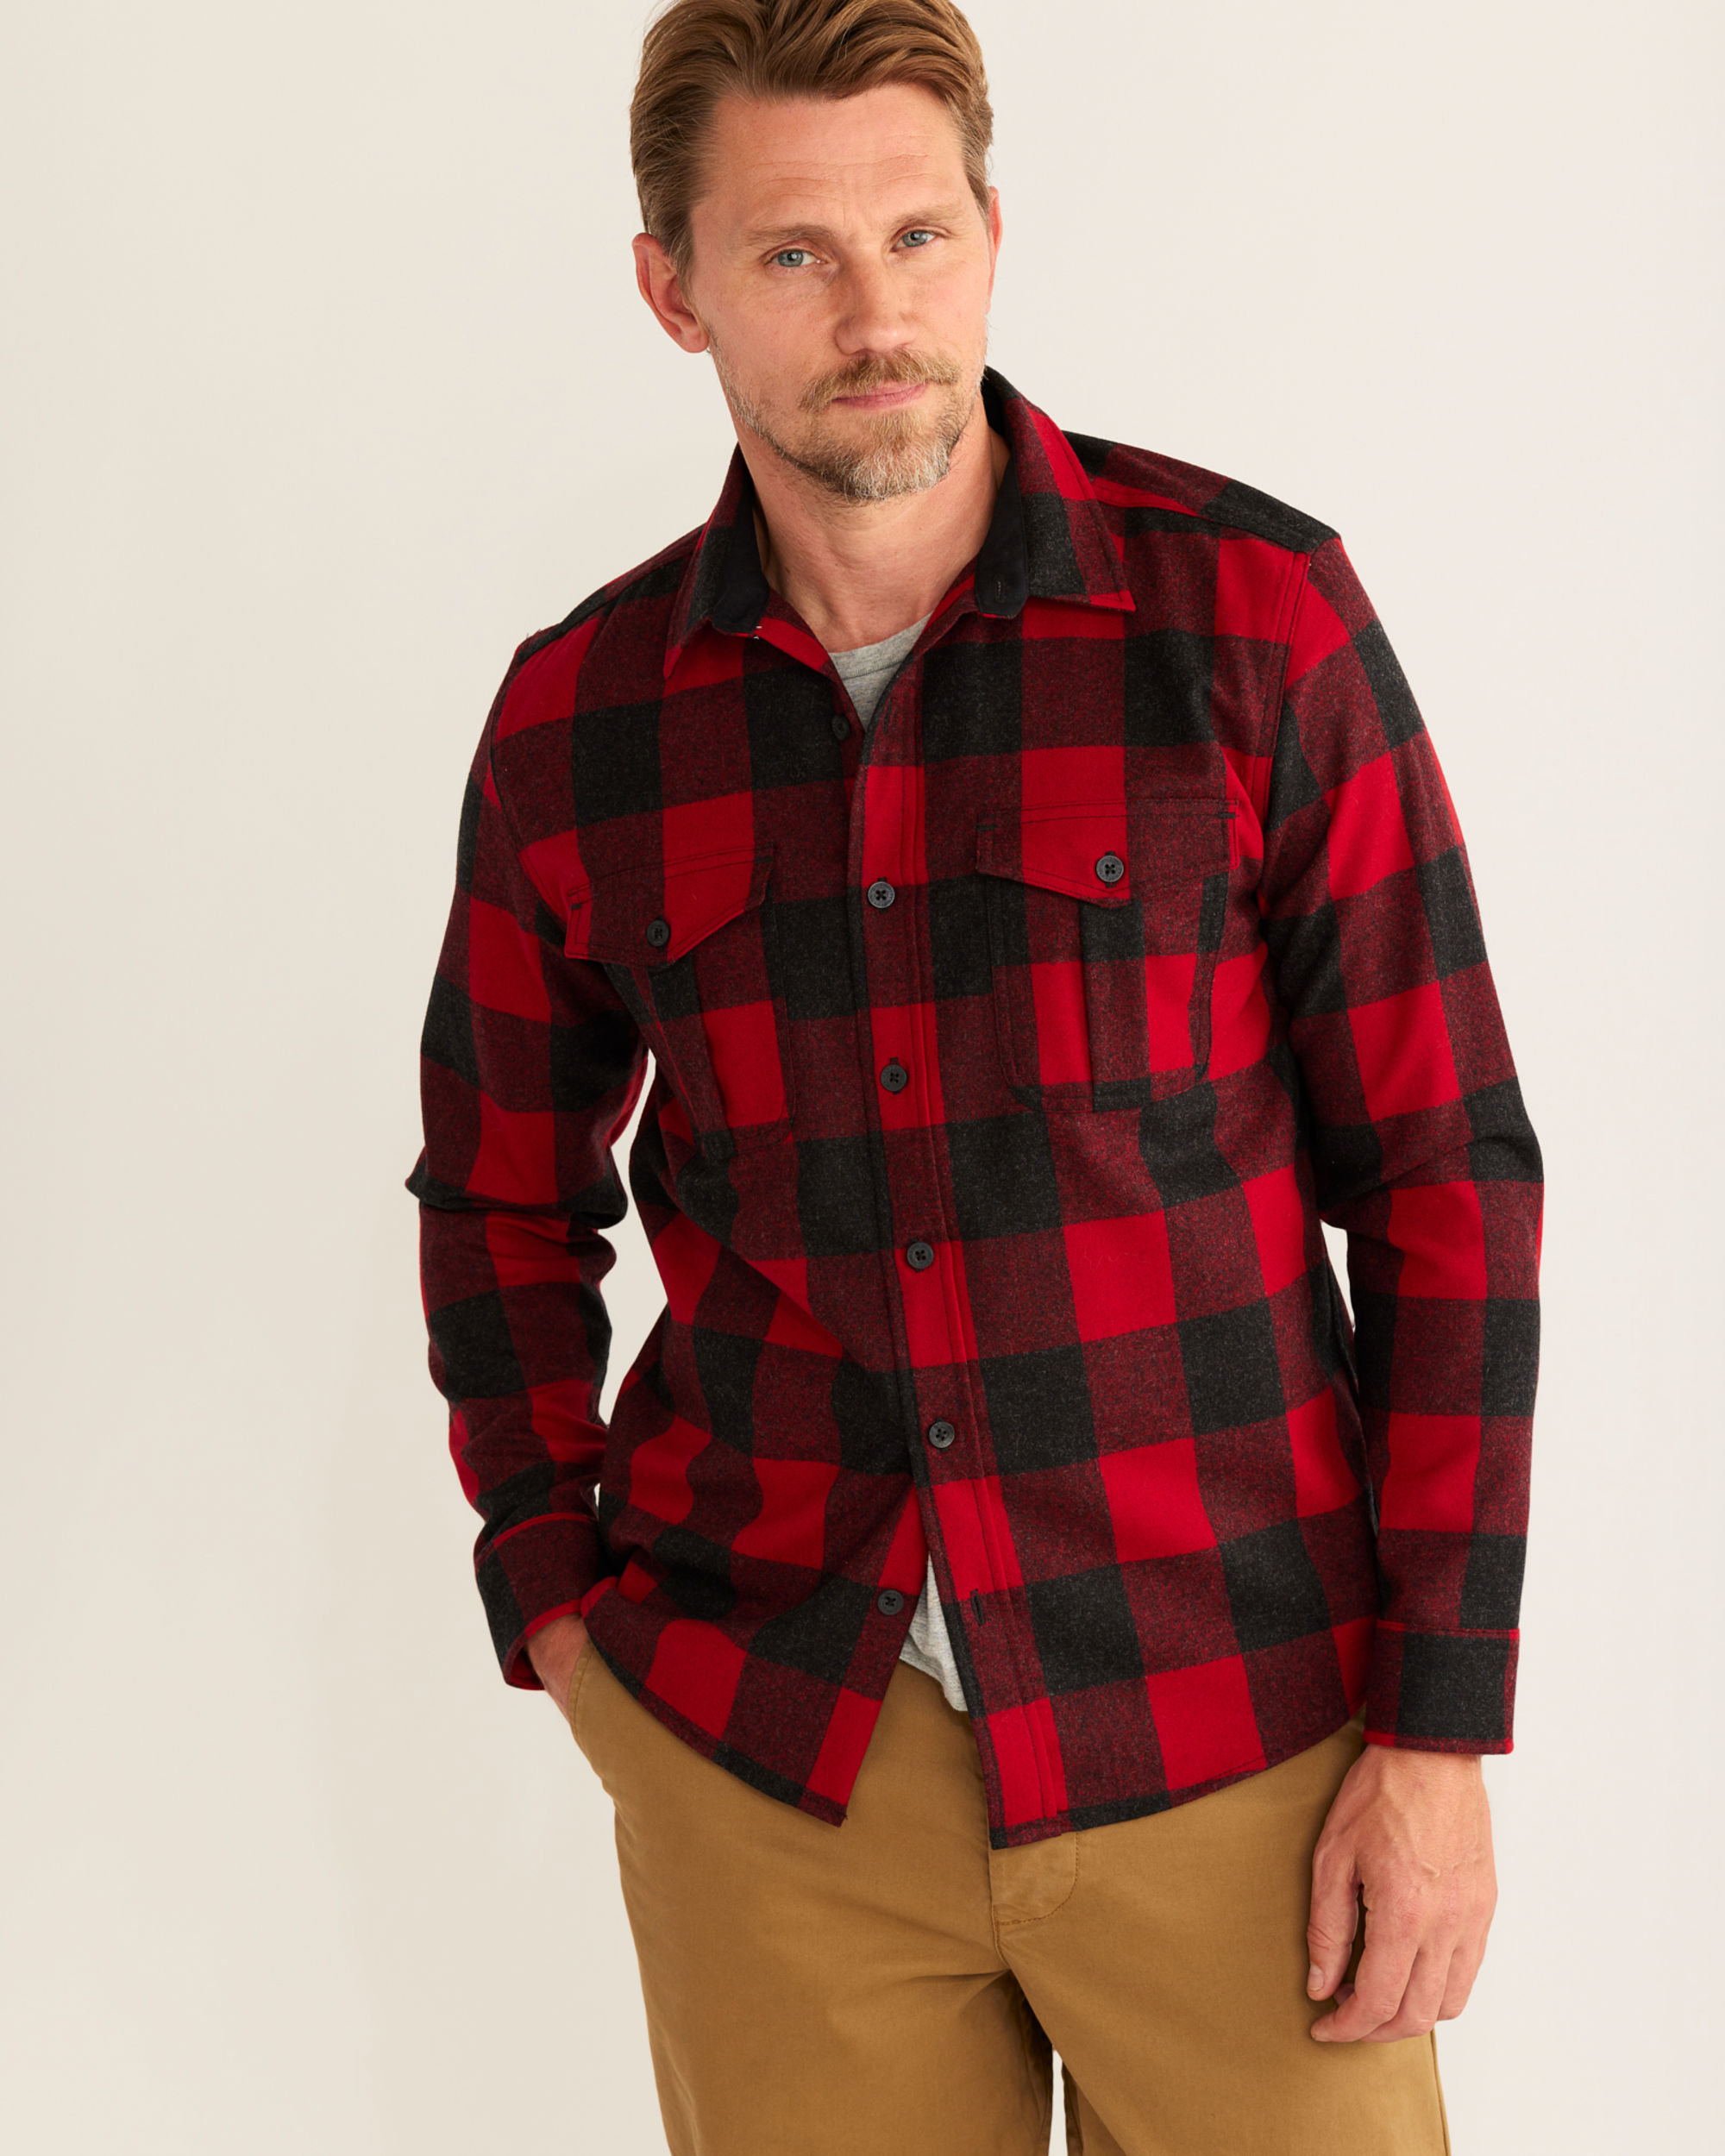 Look Stylish & Sharp by Shopping the Men's Scout Shirt | Pendleton